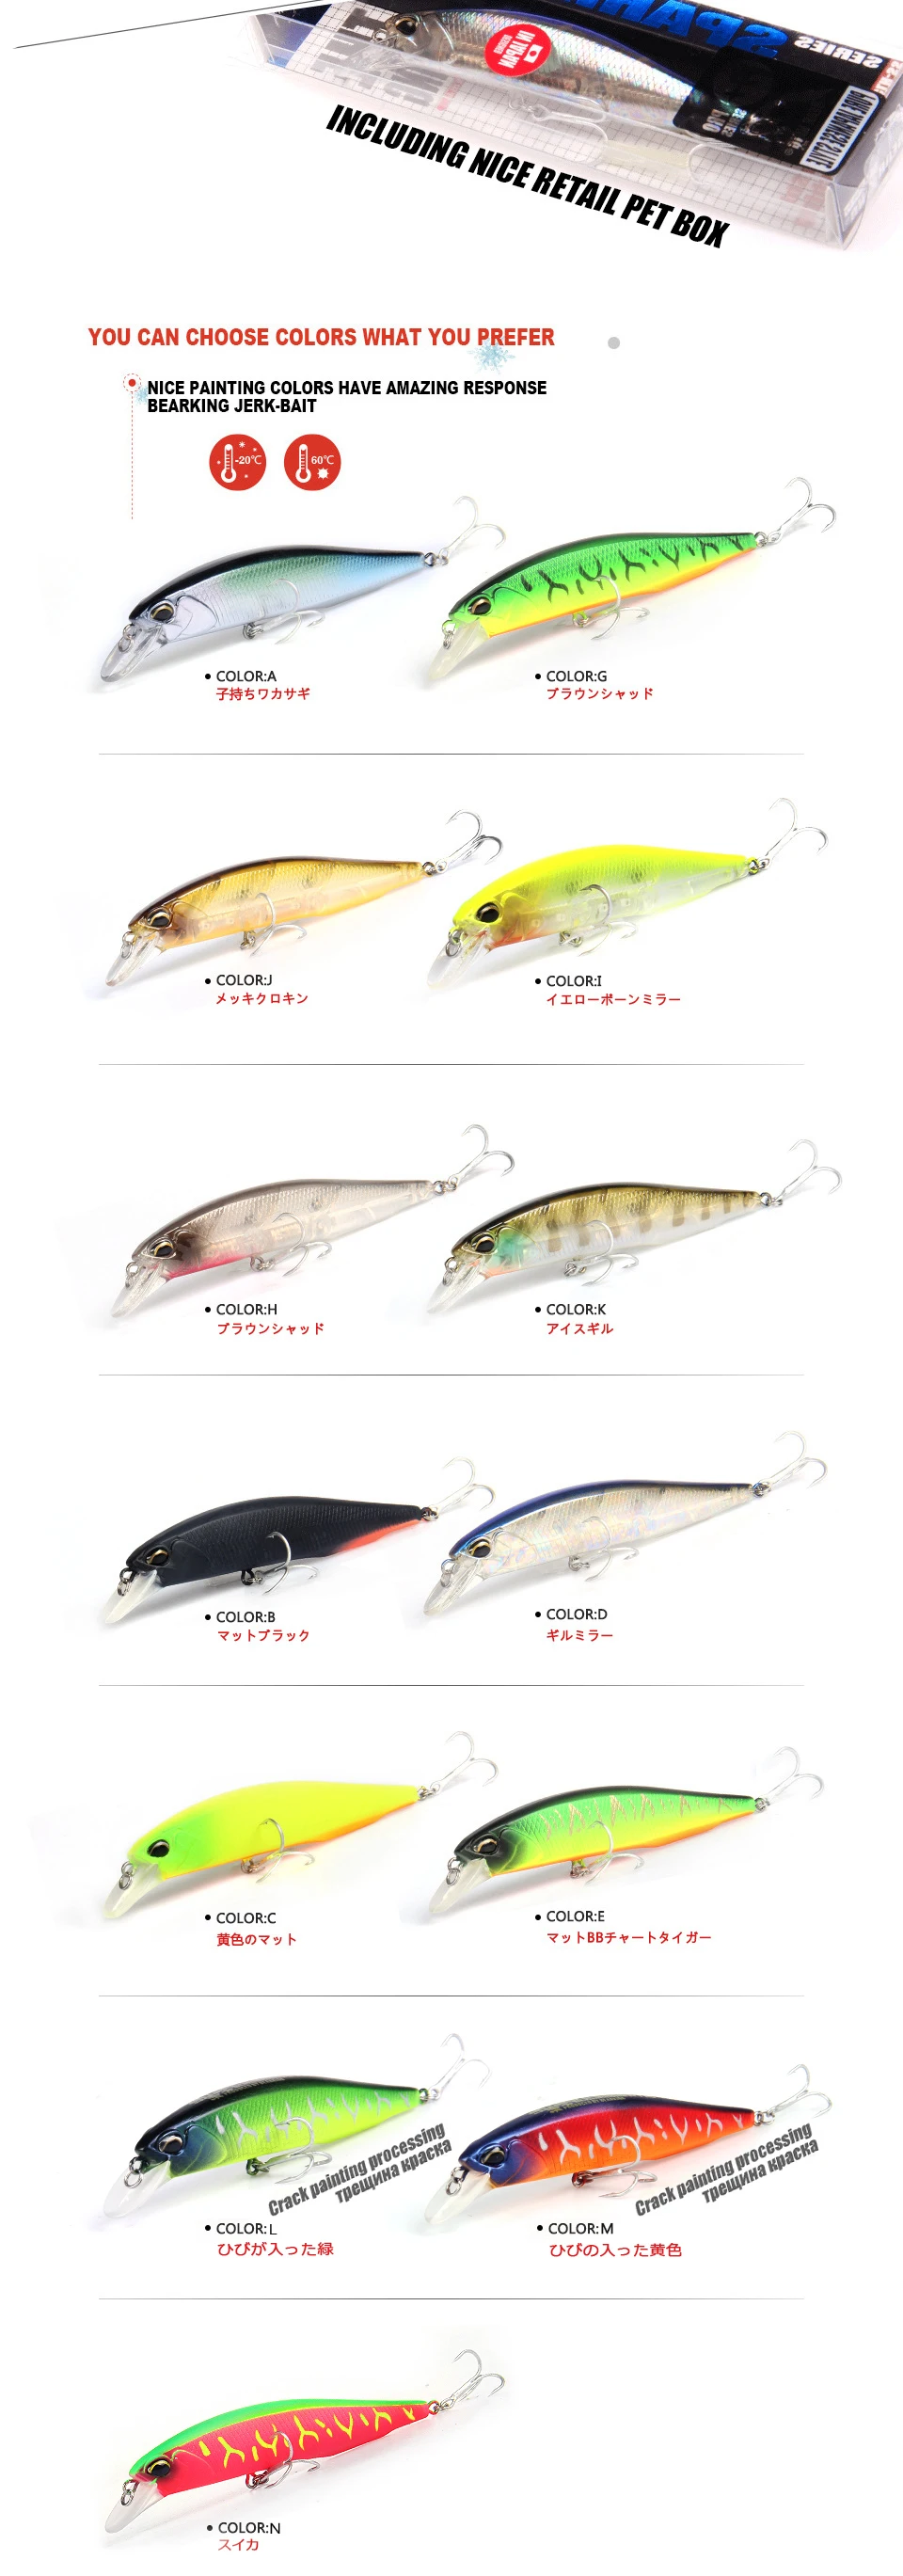 Bearking 10cm 15g hot model fishing lures hard bait 14color for choose minnow,quality professional minnow depth0.8-1.5m